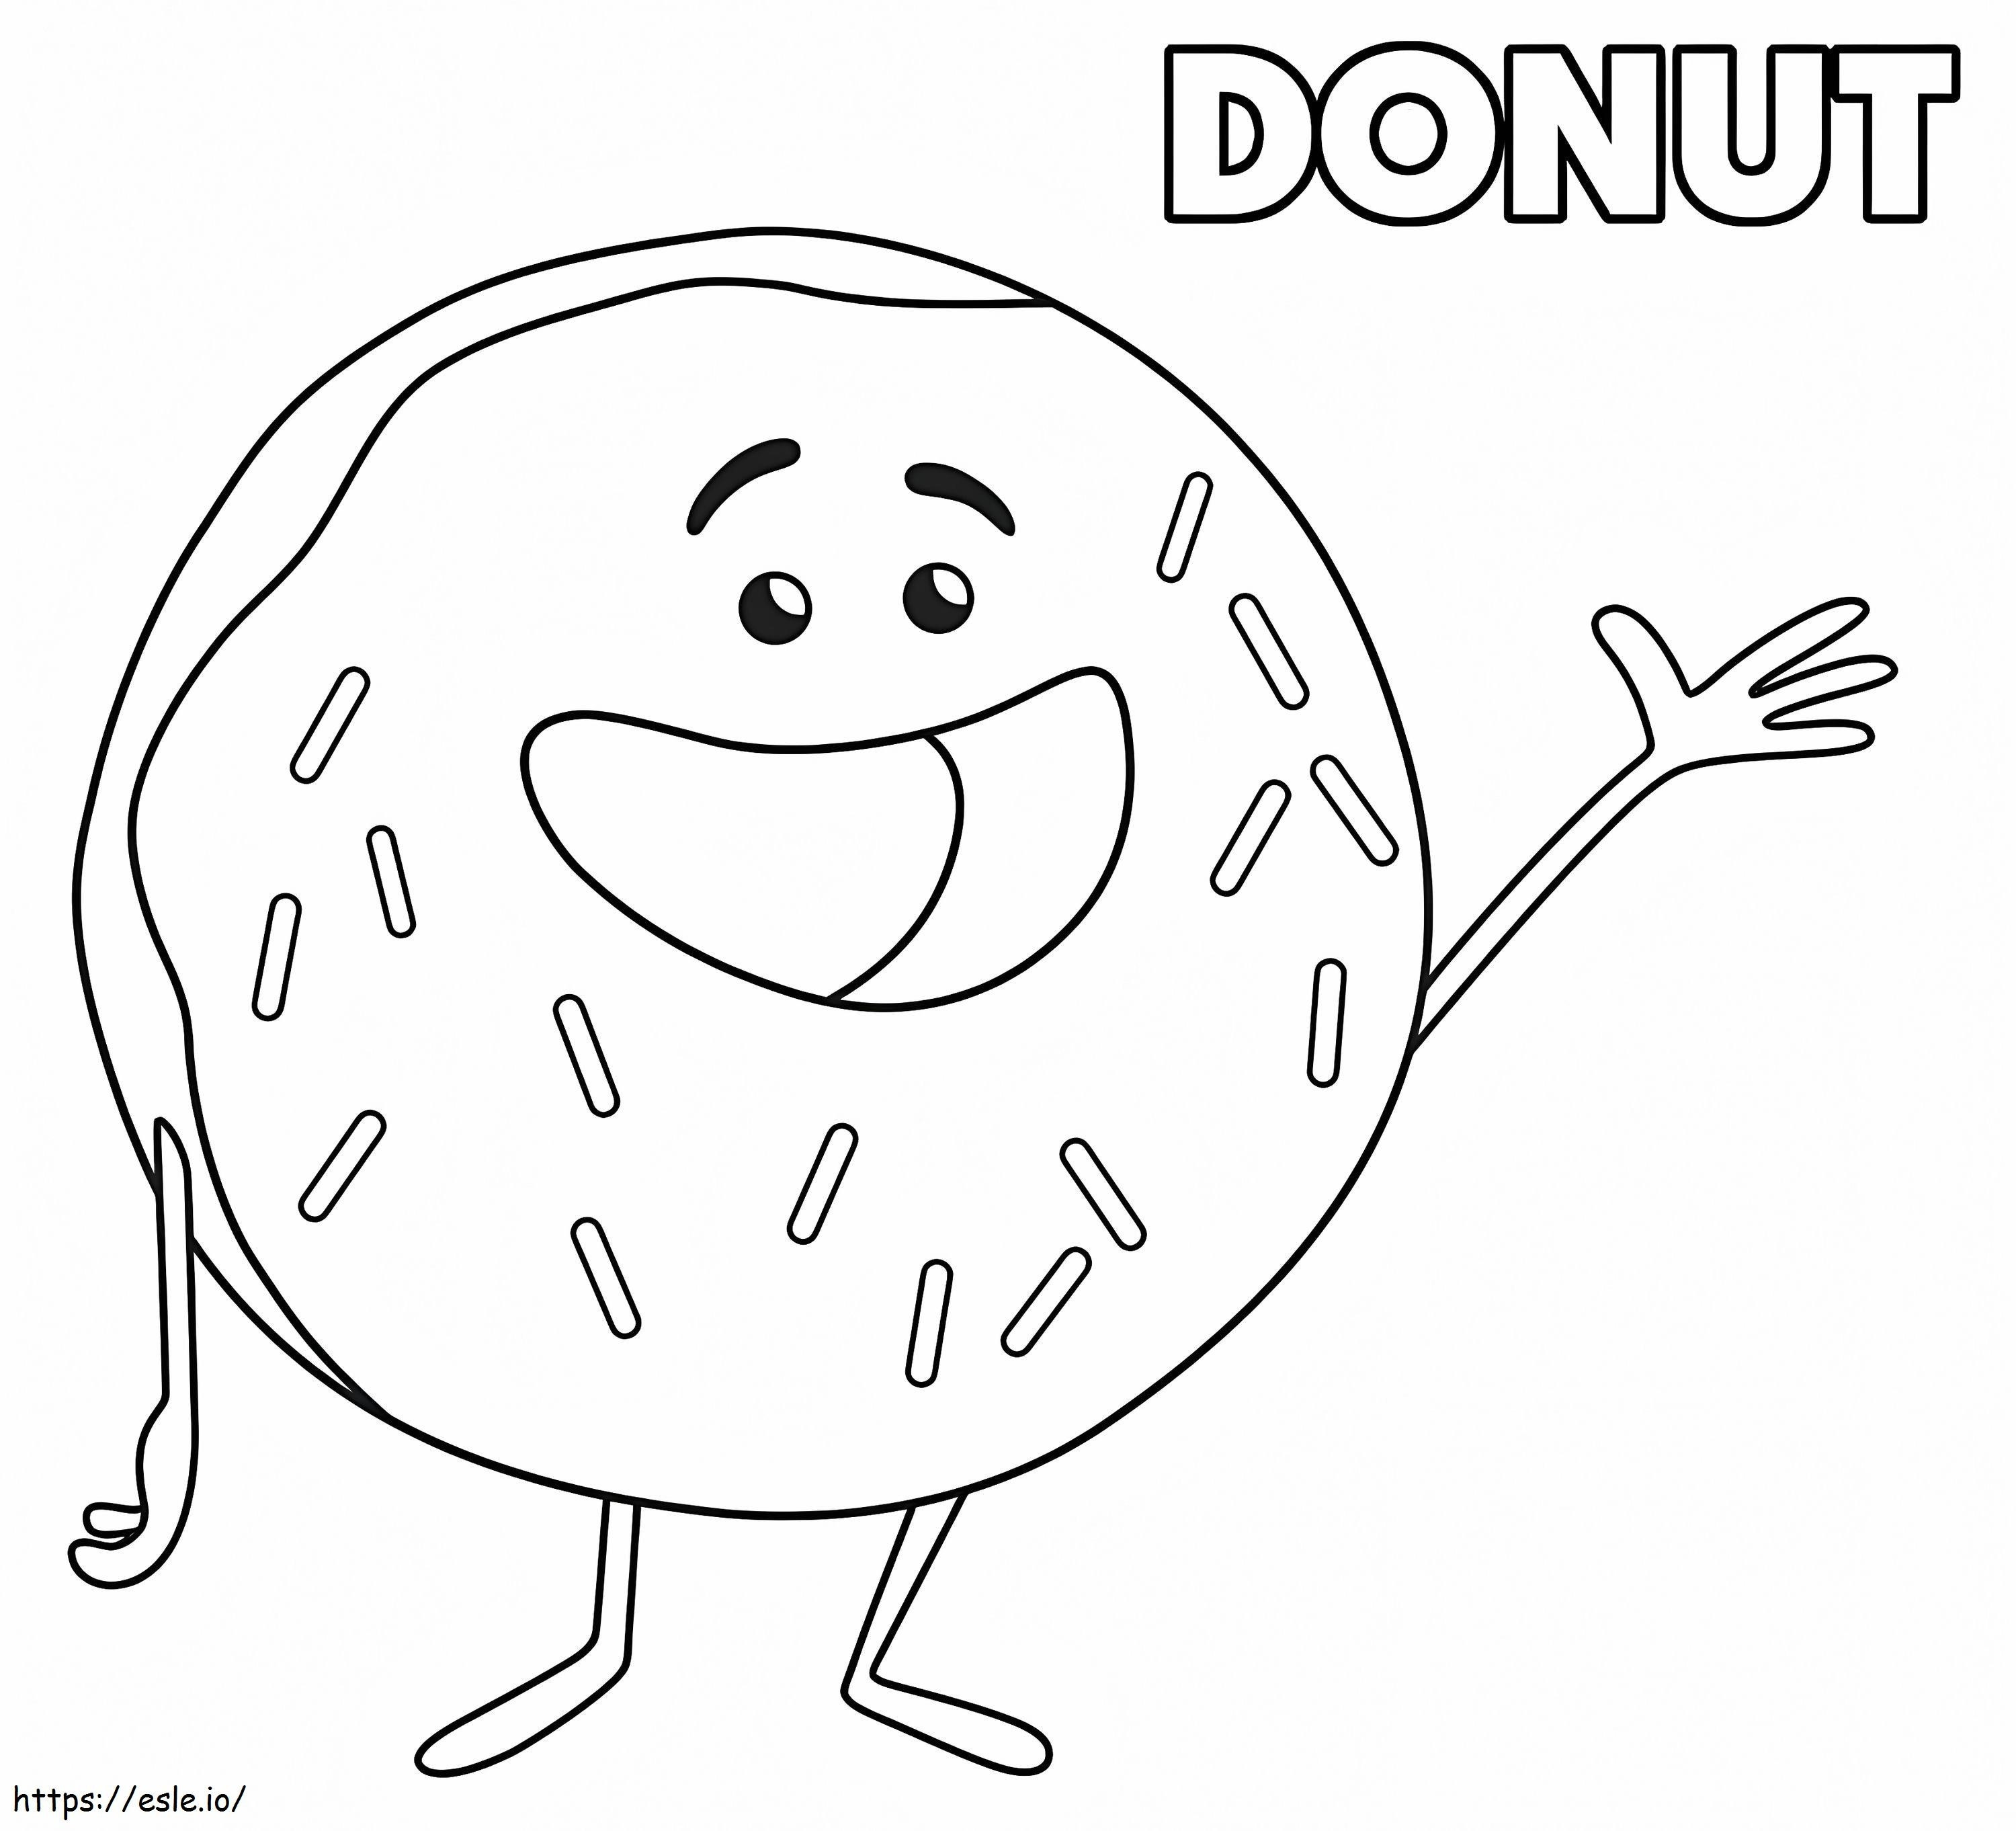 Donut From The Emoji Movie coloring page